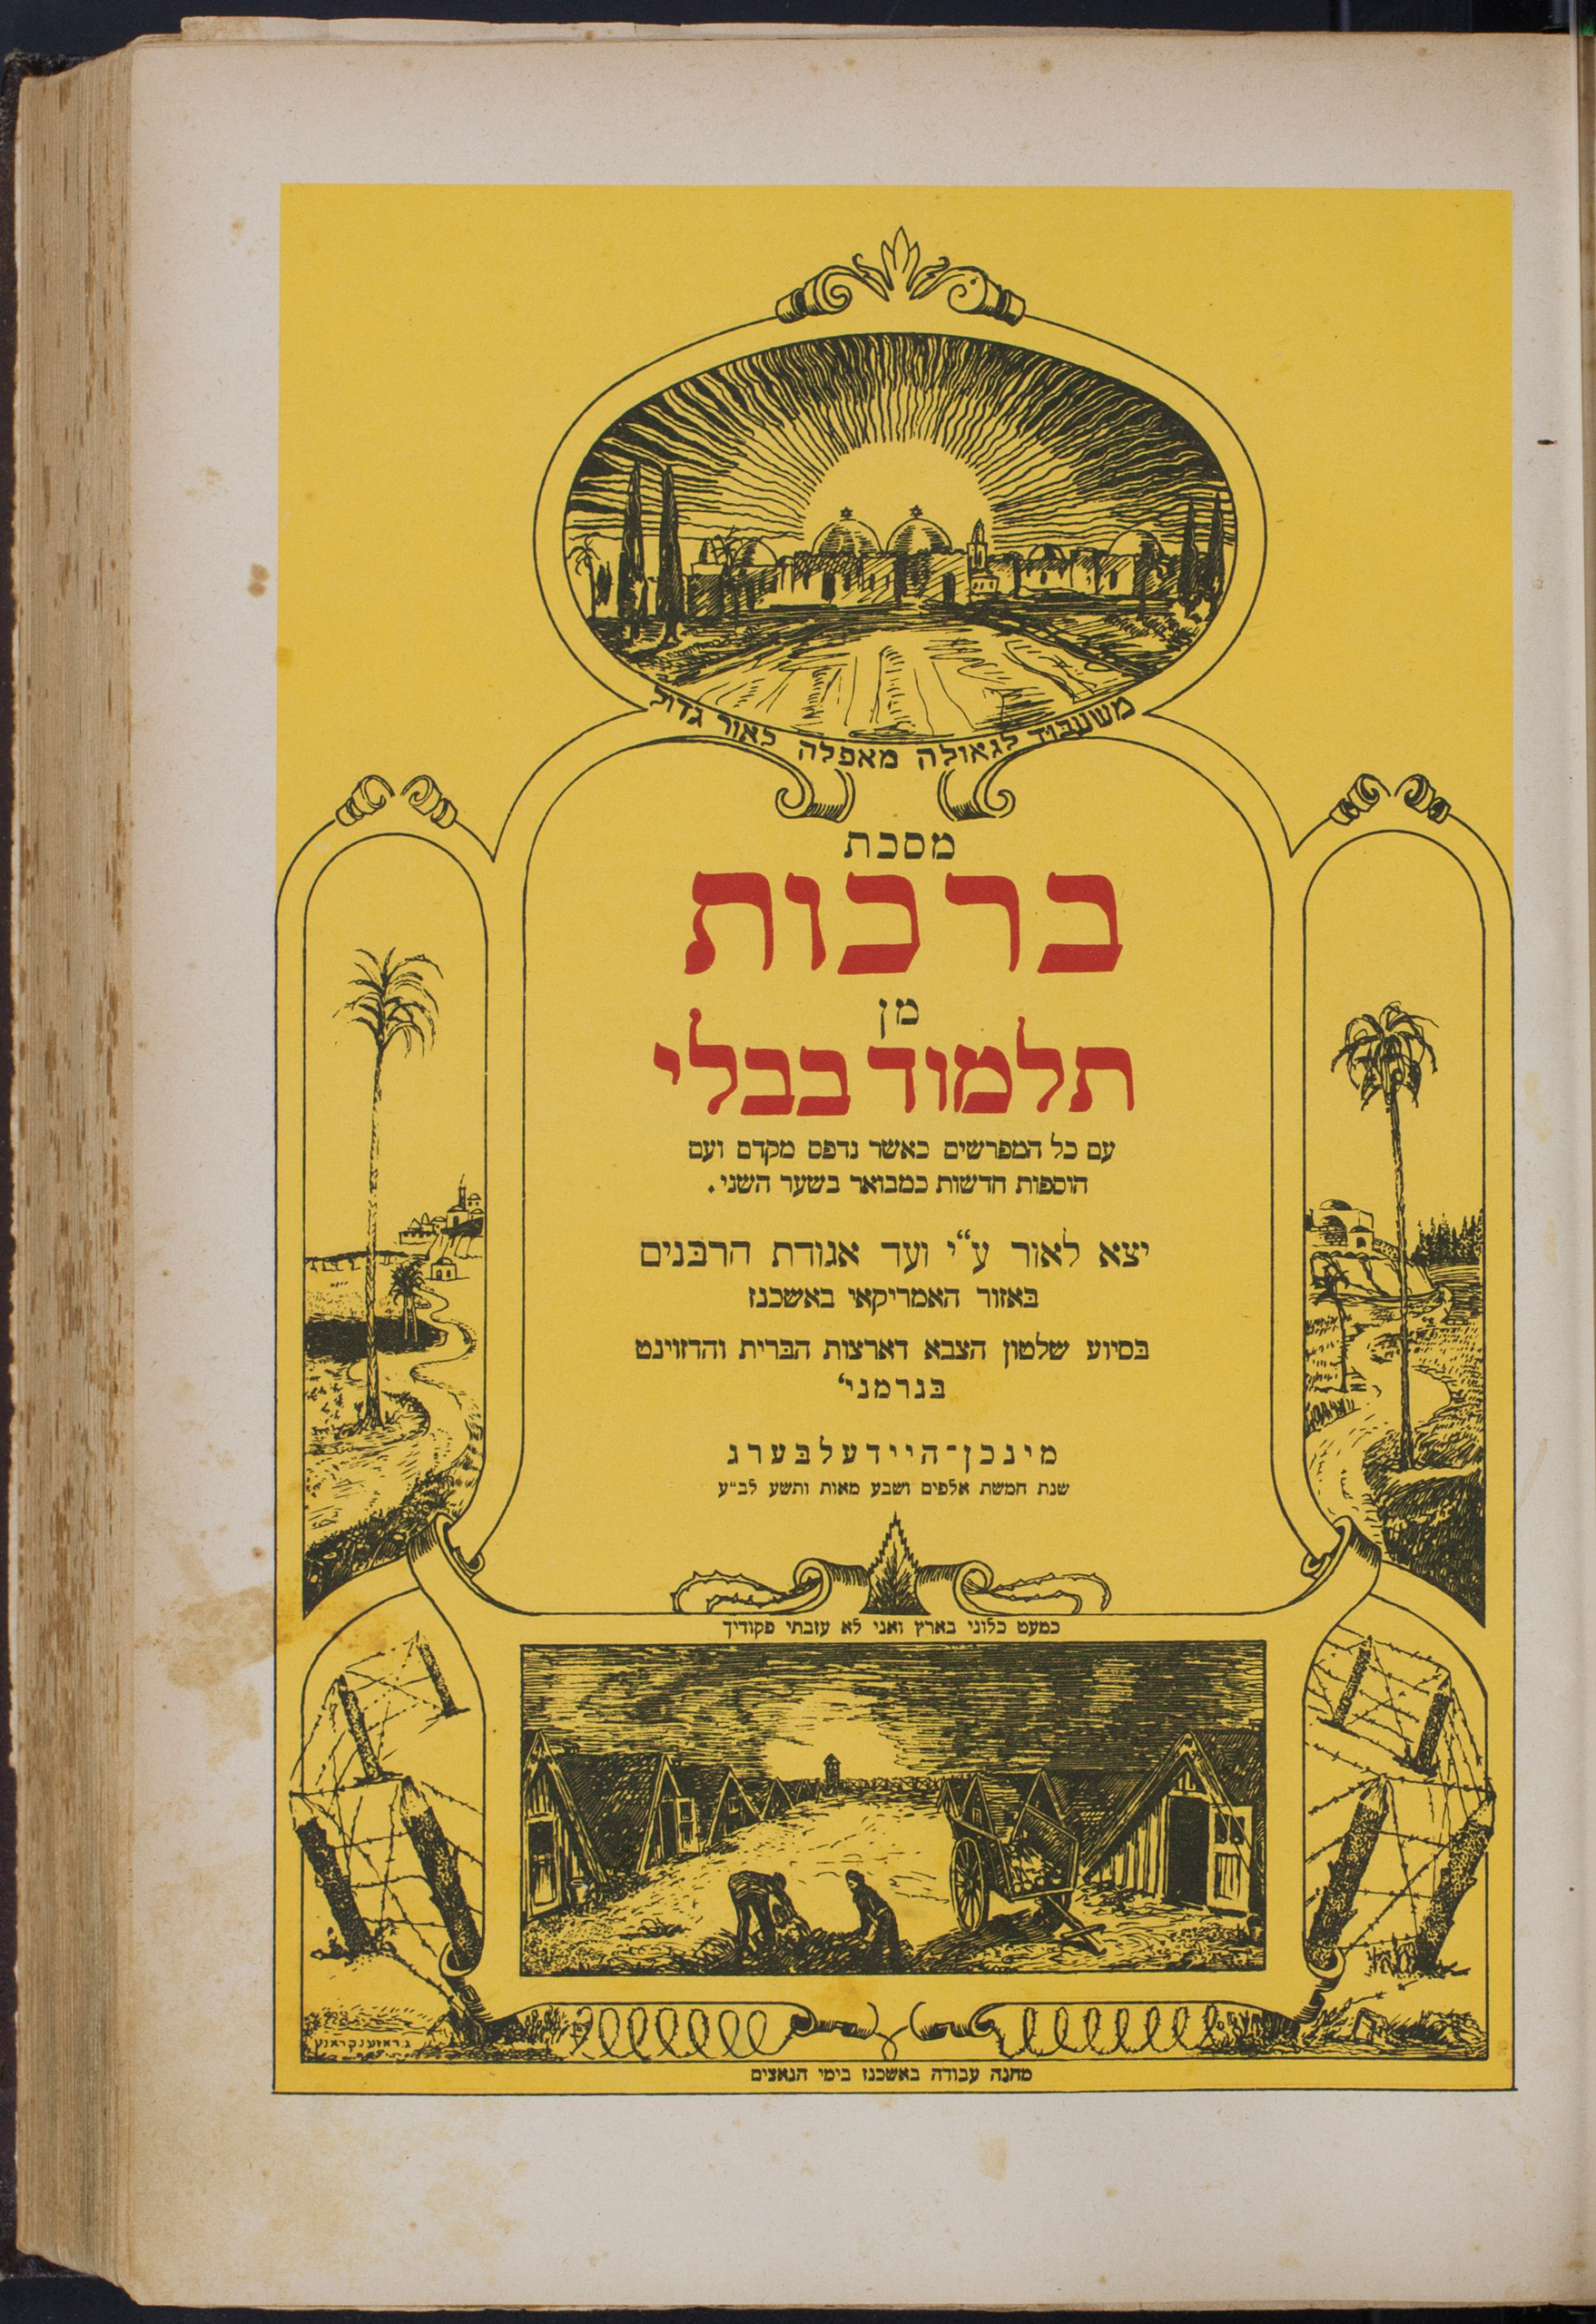 The title page of the Survivors' Talmud.